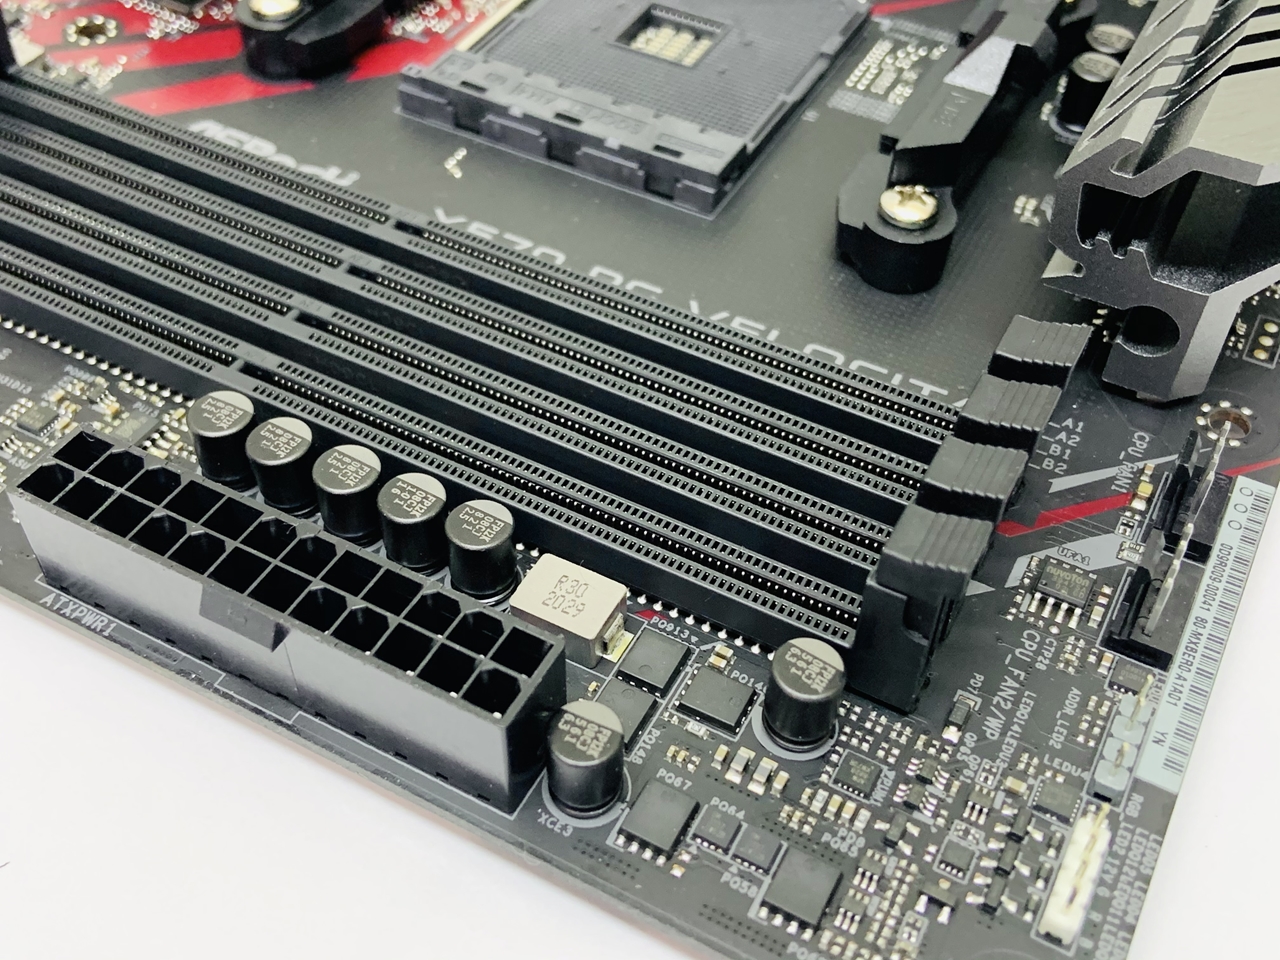 ASRock X570 PG Velocita Motherboard Review - Page 3 of 8 - AMD3D